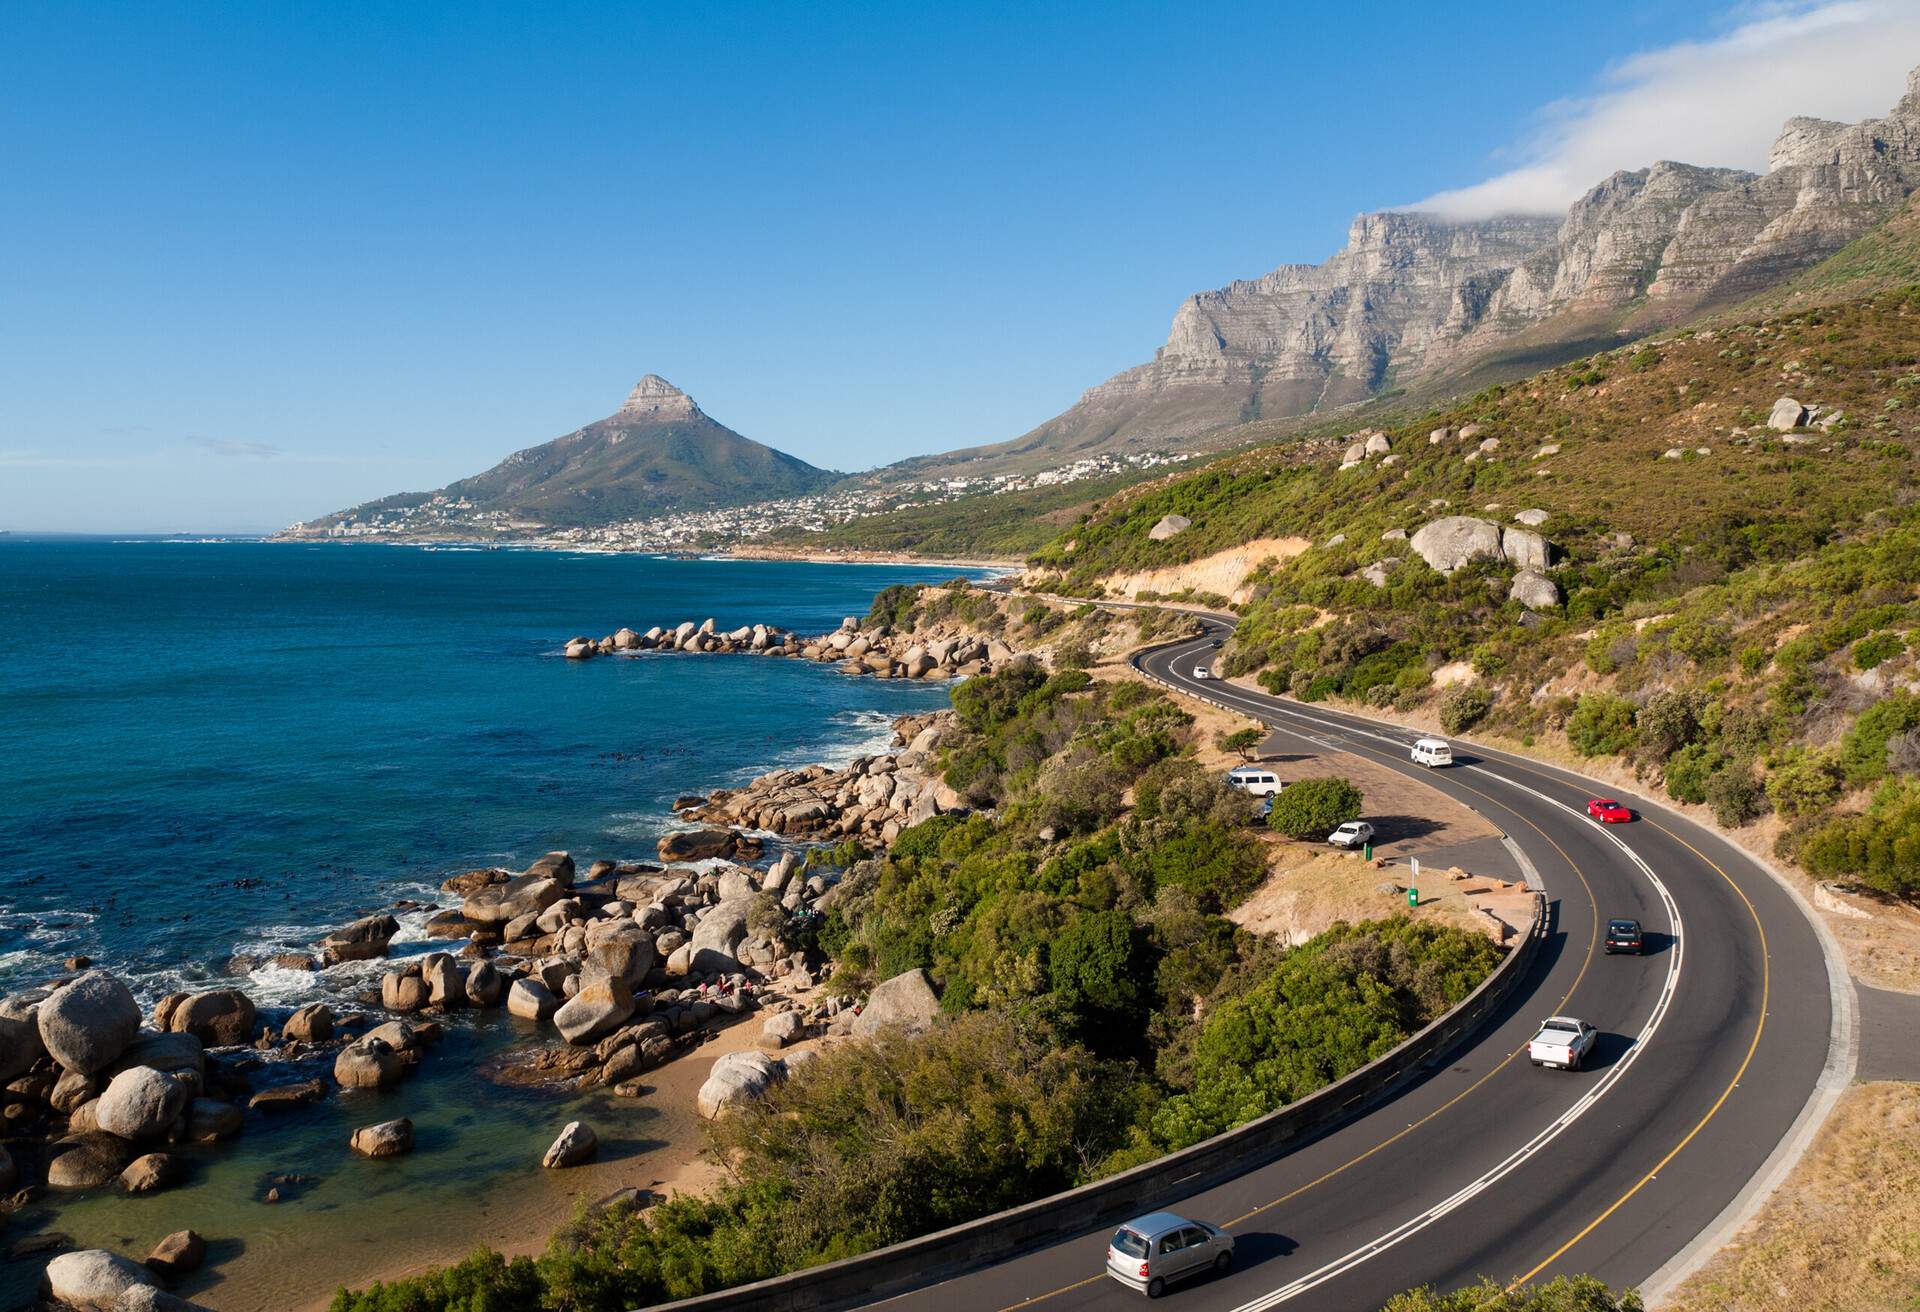 Cars travel across a coastal road along a forested slope with sweeping views of rugged mountains and a vast blue ocean.